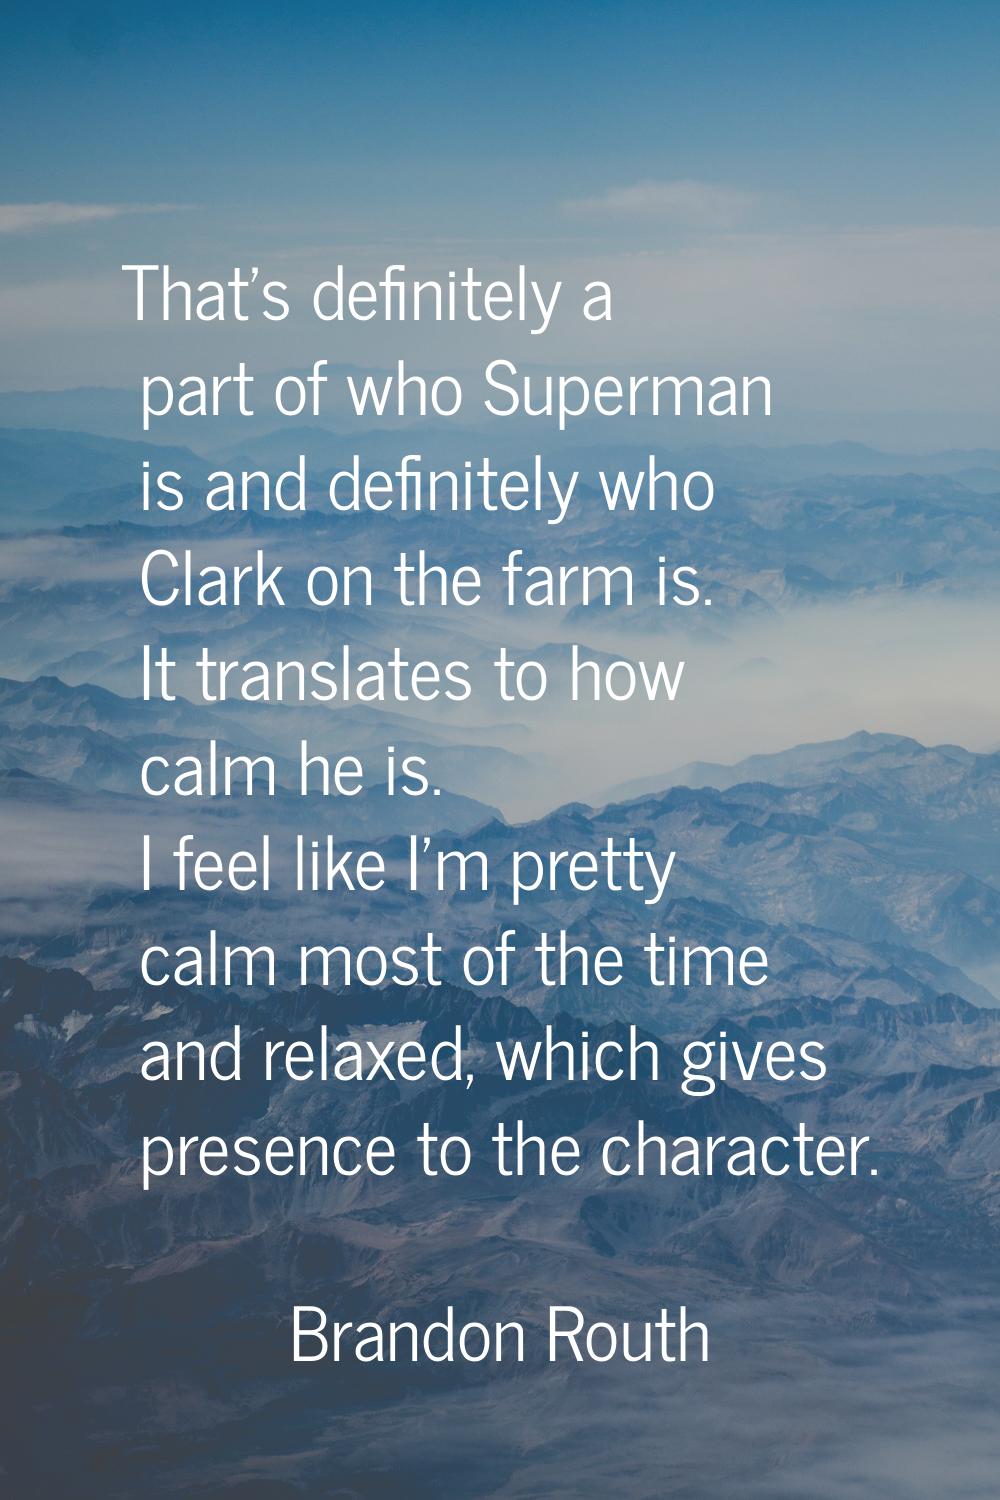 That's definitely a part of who Superman is and definitely who Clark on the farm is. It translates 